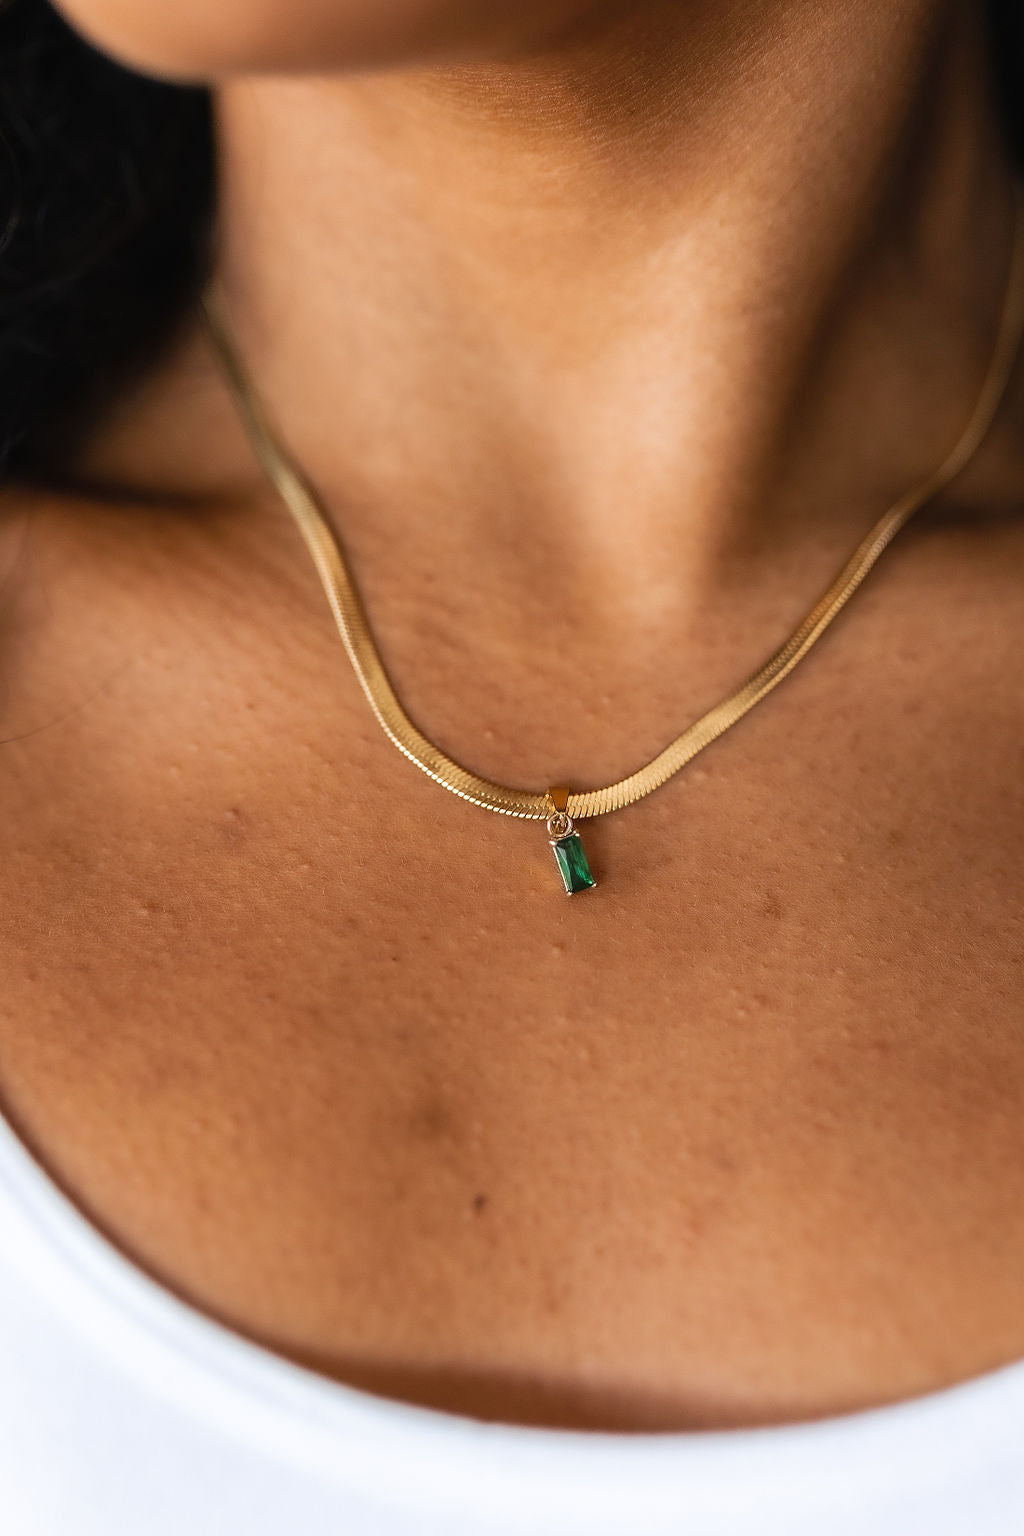 A Moment Like This Pendant Necklace in Green - WEBSITE EXCLUSIVE